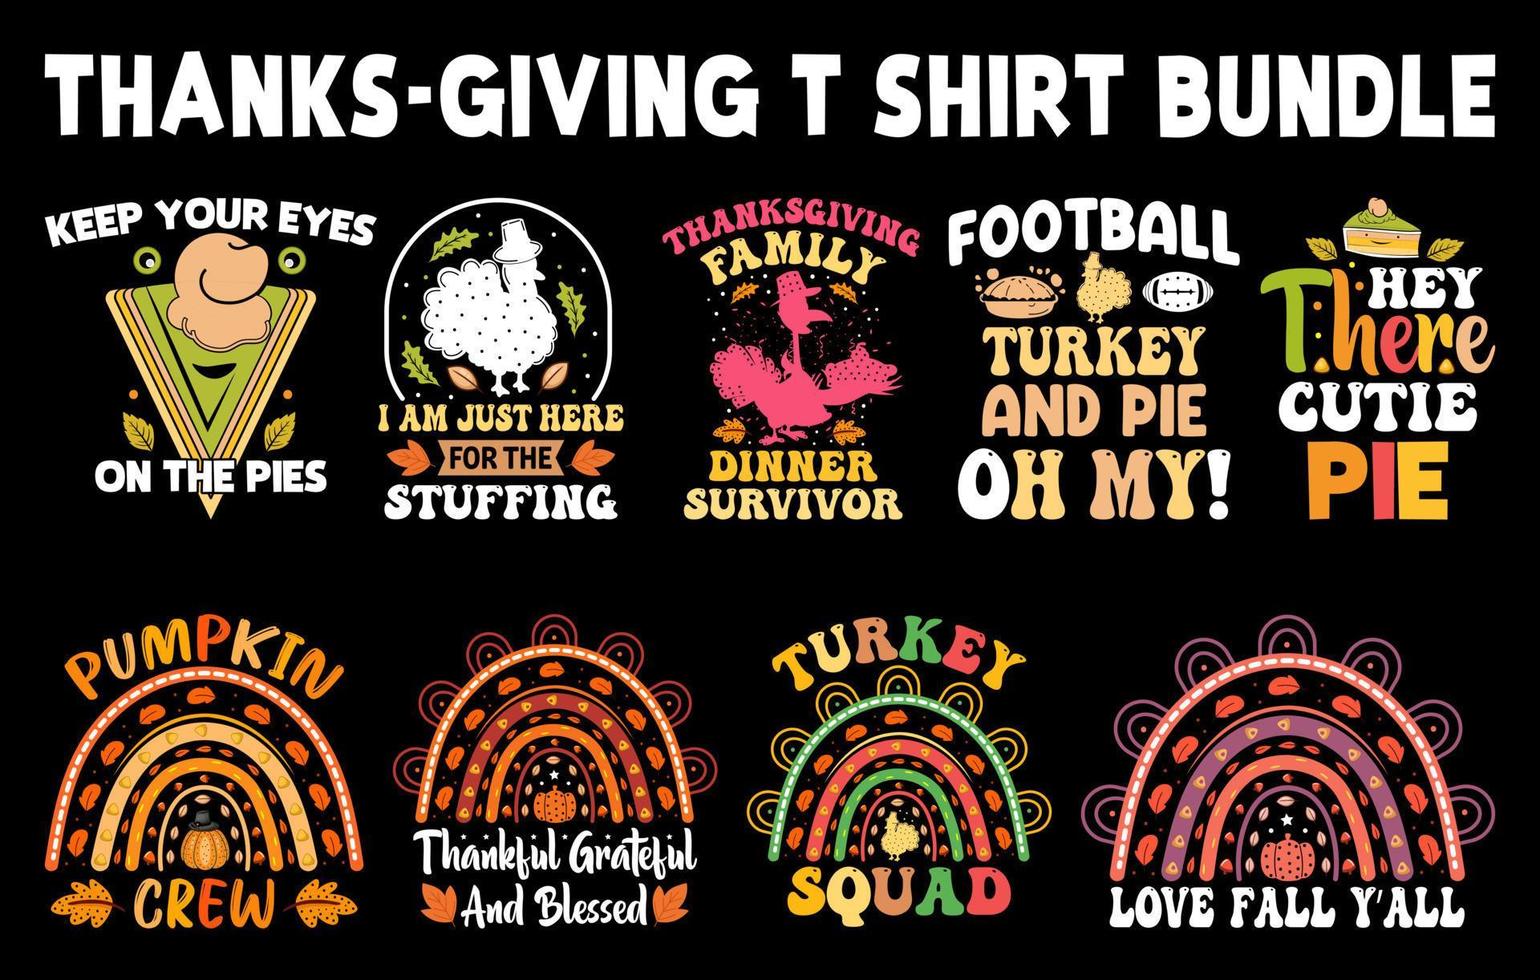 Thanksgiving t-shirt bundle, Football Turkey and Pie t-shirt design,  oh my pumpkin Crew, Turkey Squad, Love Fall Yall, Thankful Grateful and Blessed, Hey there cutie pie vector